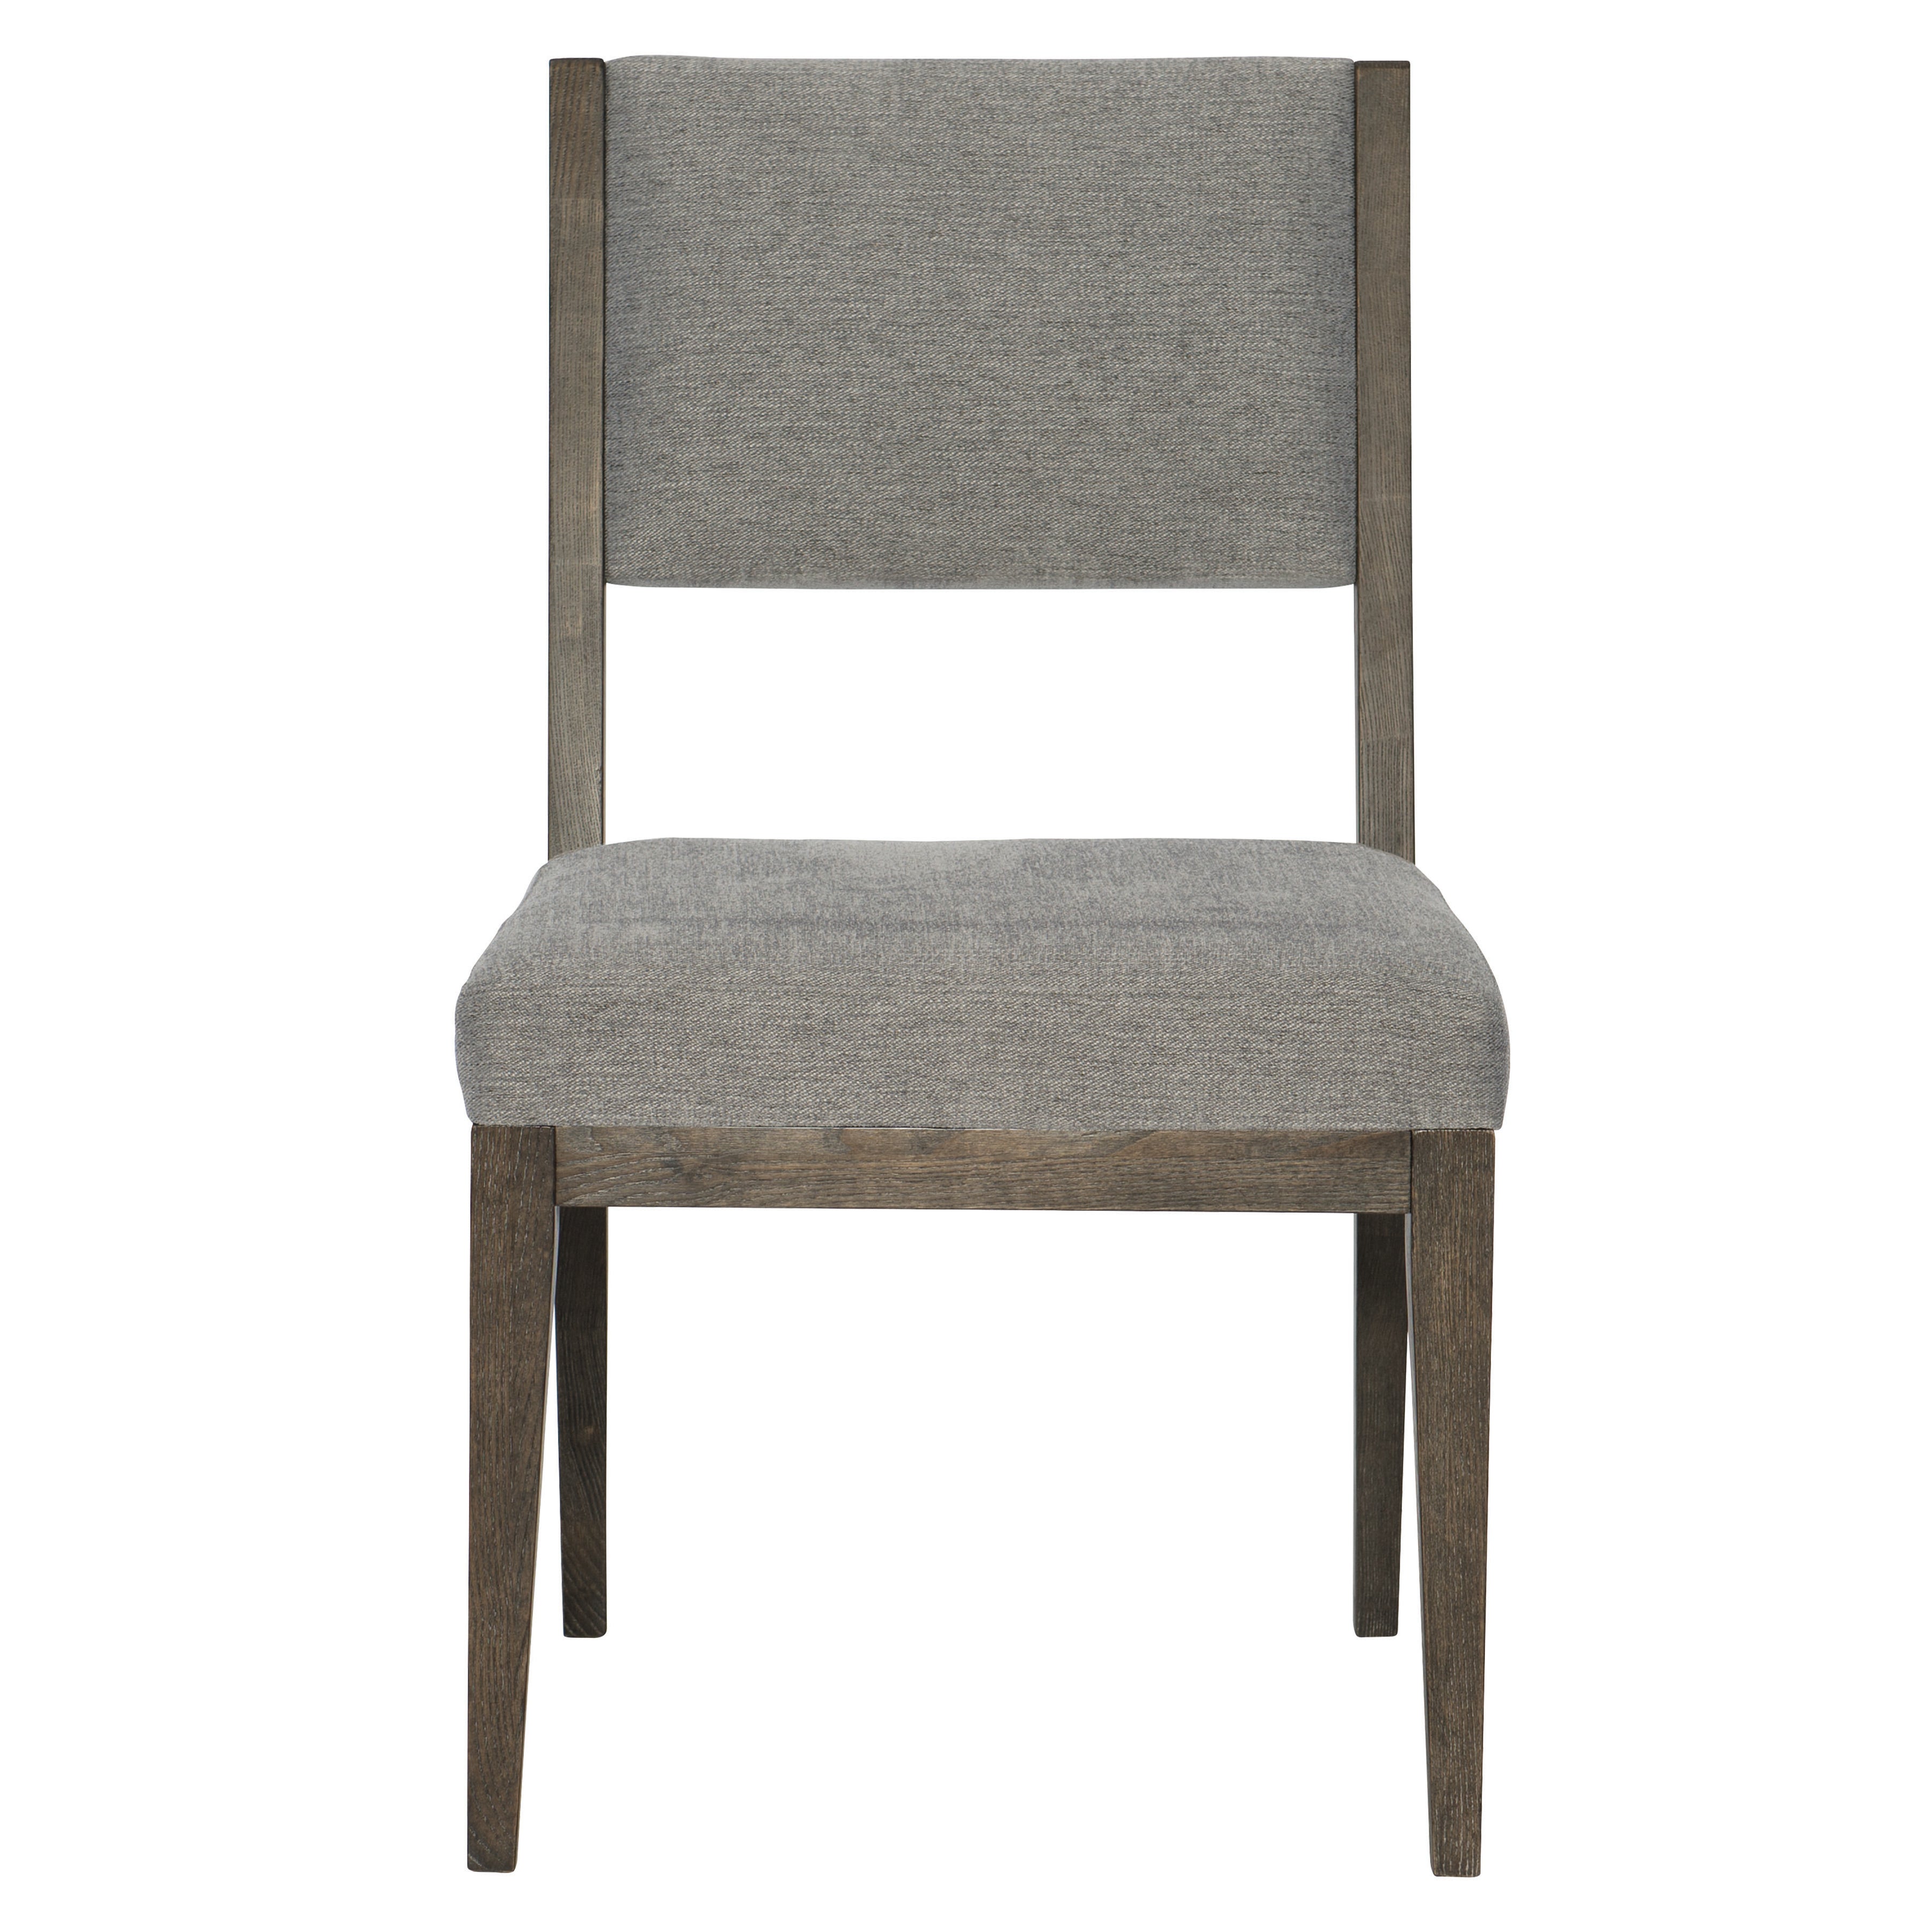 Linea Side Chair in Cerused Charcoal Finish